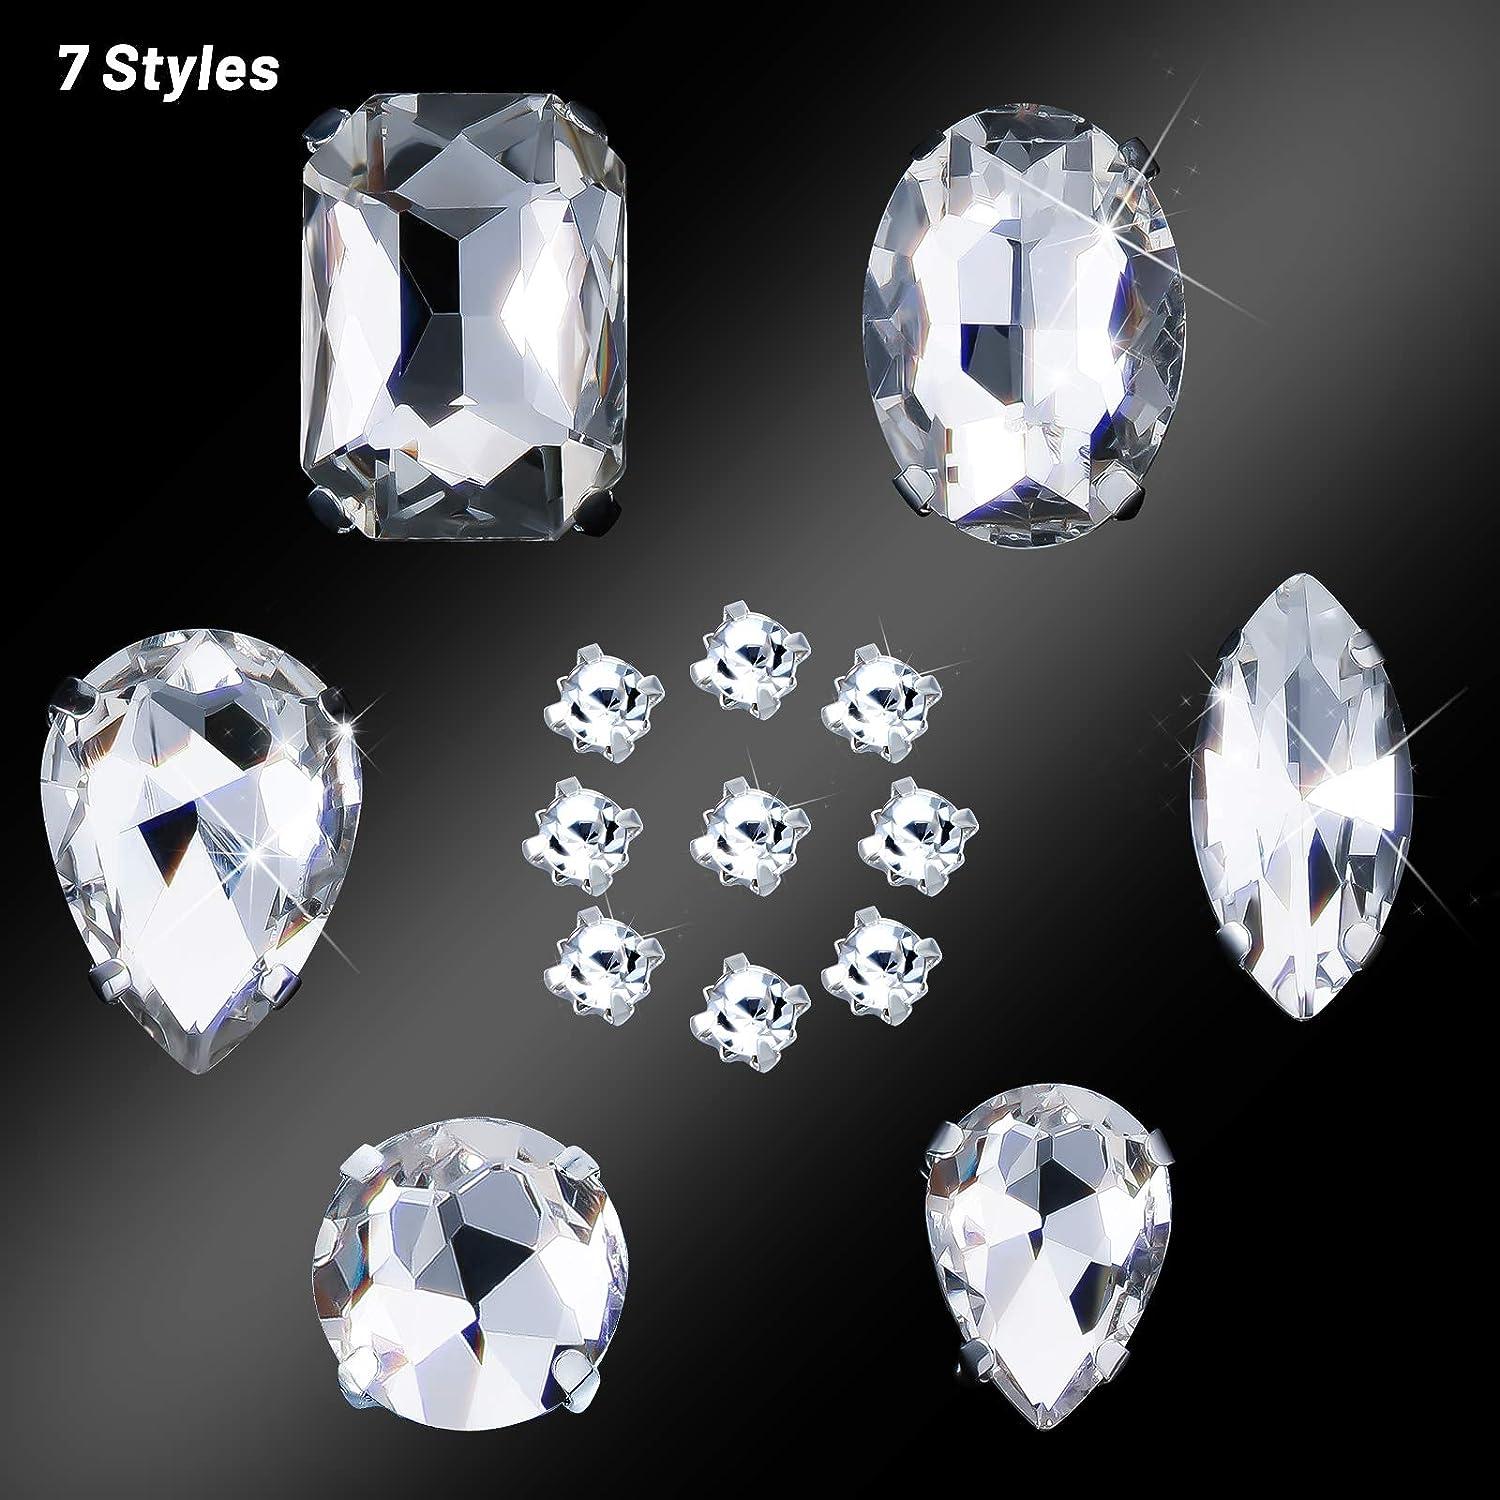 240 Pieces Large Sew on Rhinestones Clear Glass Crystal Gems Diamond Stone  Metal Back Prong Setting Crafts Mix Shapes Claw for Jewelry, Clothes